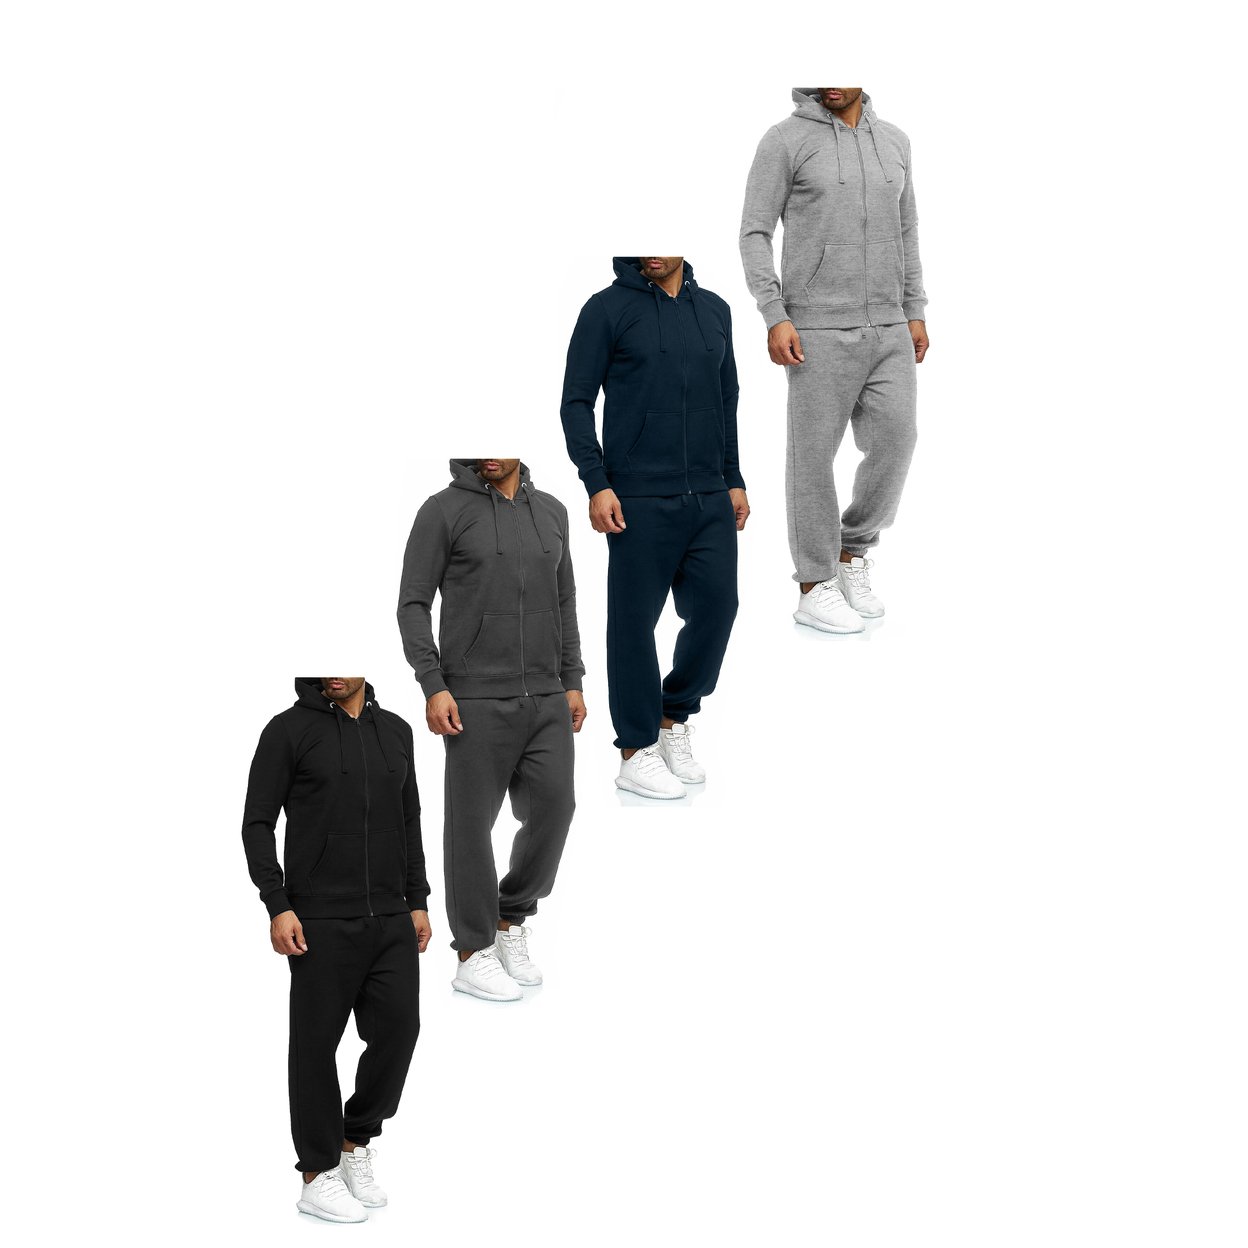 Men's Casual Big & Tall Athletic Active Winter Warm Fleece Lined Full Zip Tracksuit Jogger Set - Navy, X-large